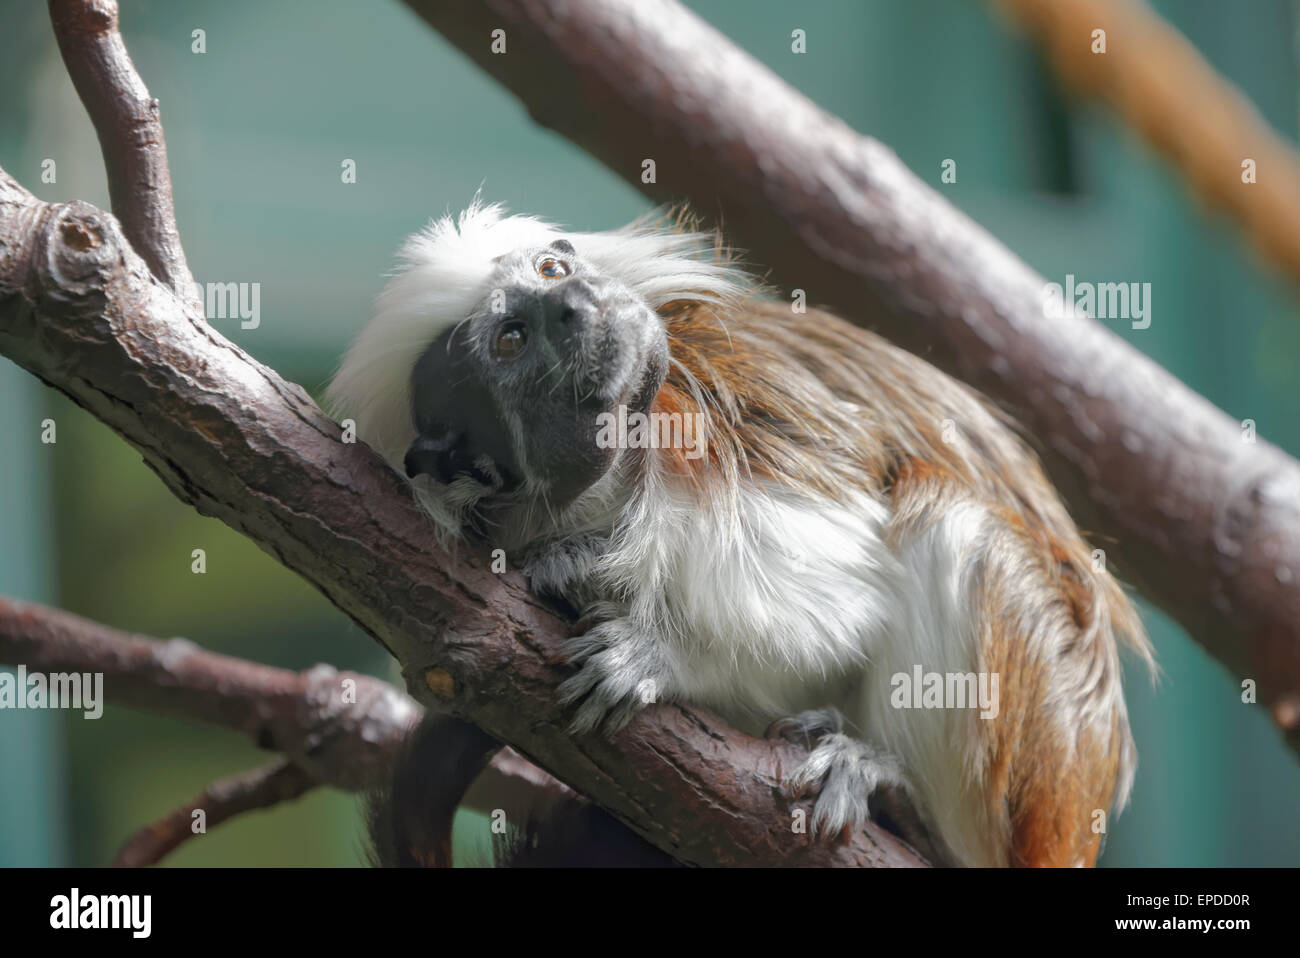 Cotton-top tamarin (Saguinus oedipus) is a small New World monkey weighing less than 0.5 kg Stock Photo